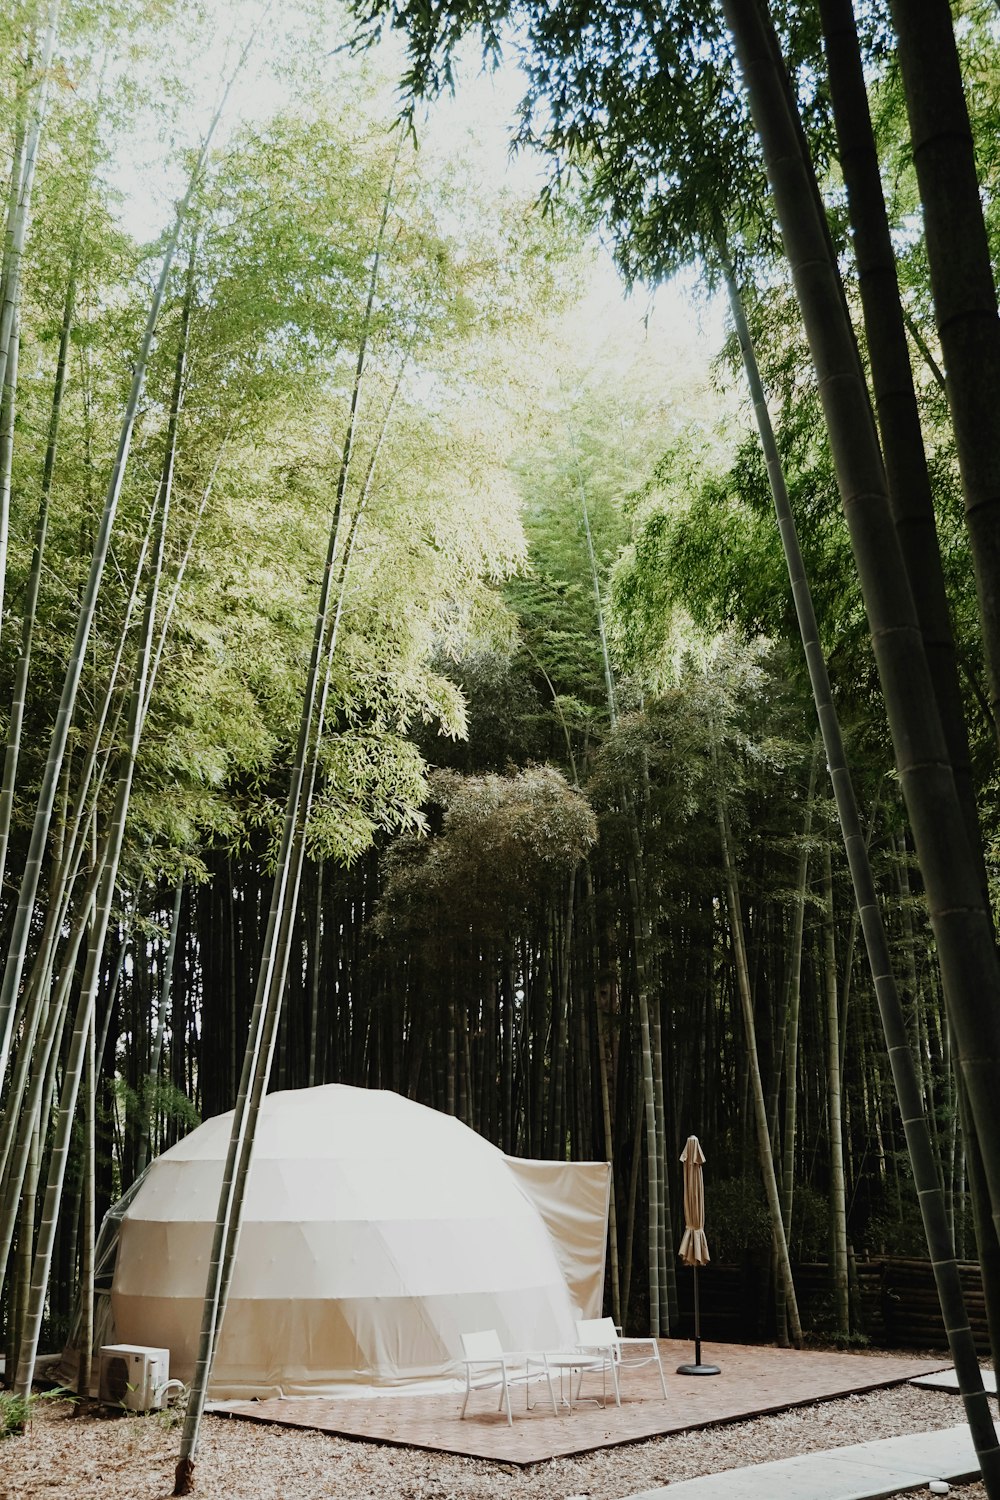 a tent in the middle of a bamboo forest